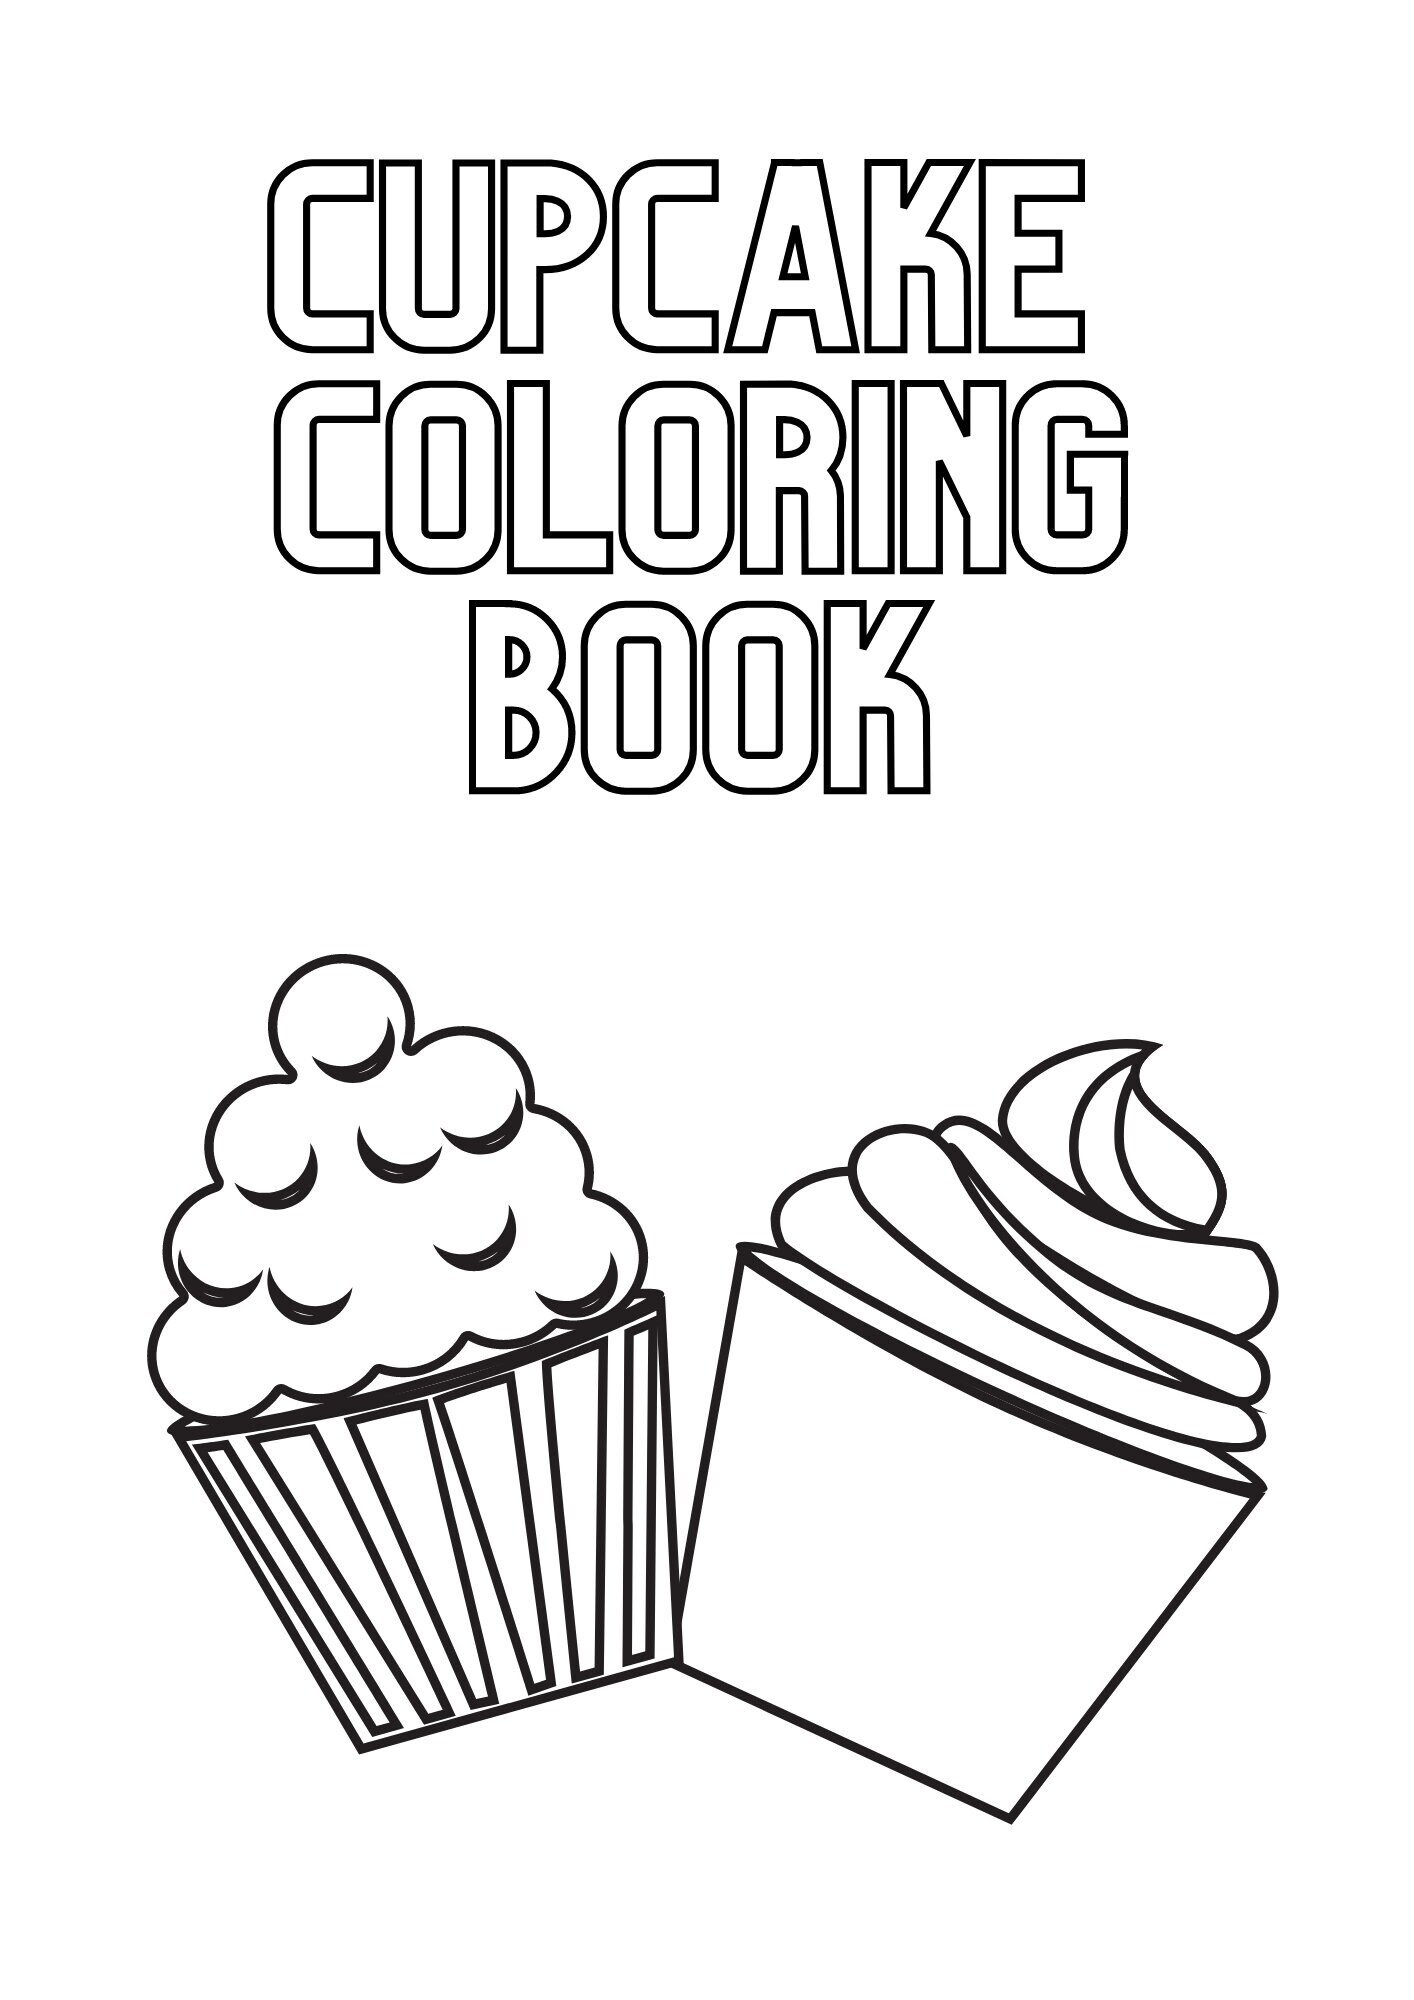 Color Me a Cupcake: Small Coloring Books For Kids [Book]